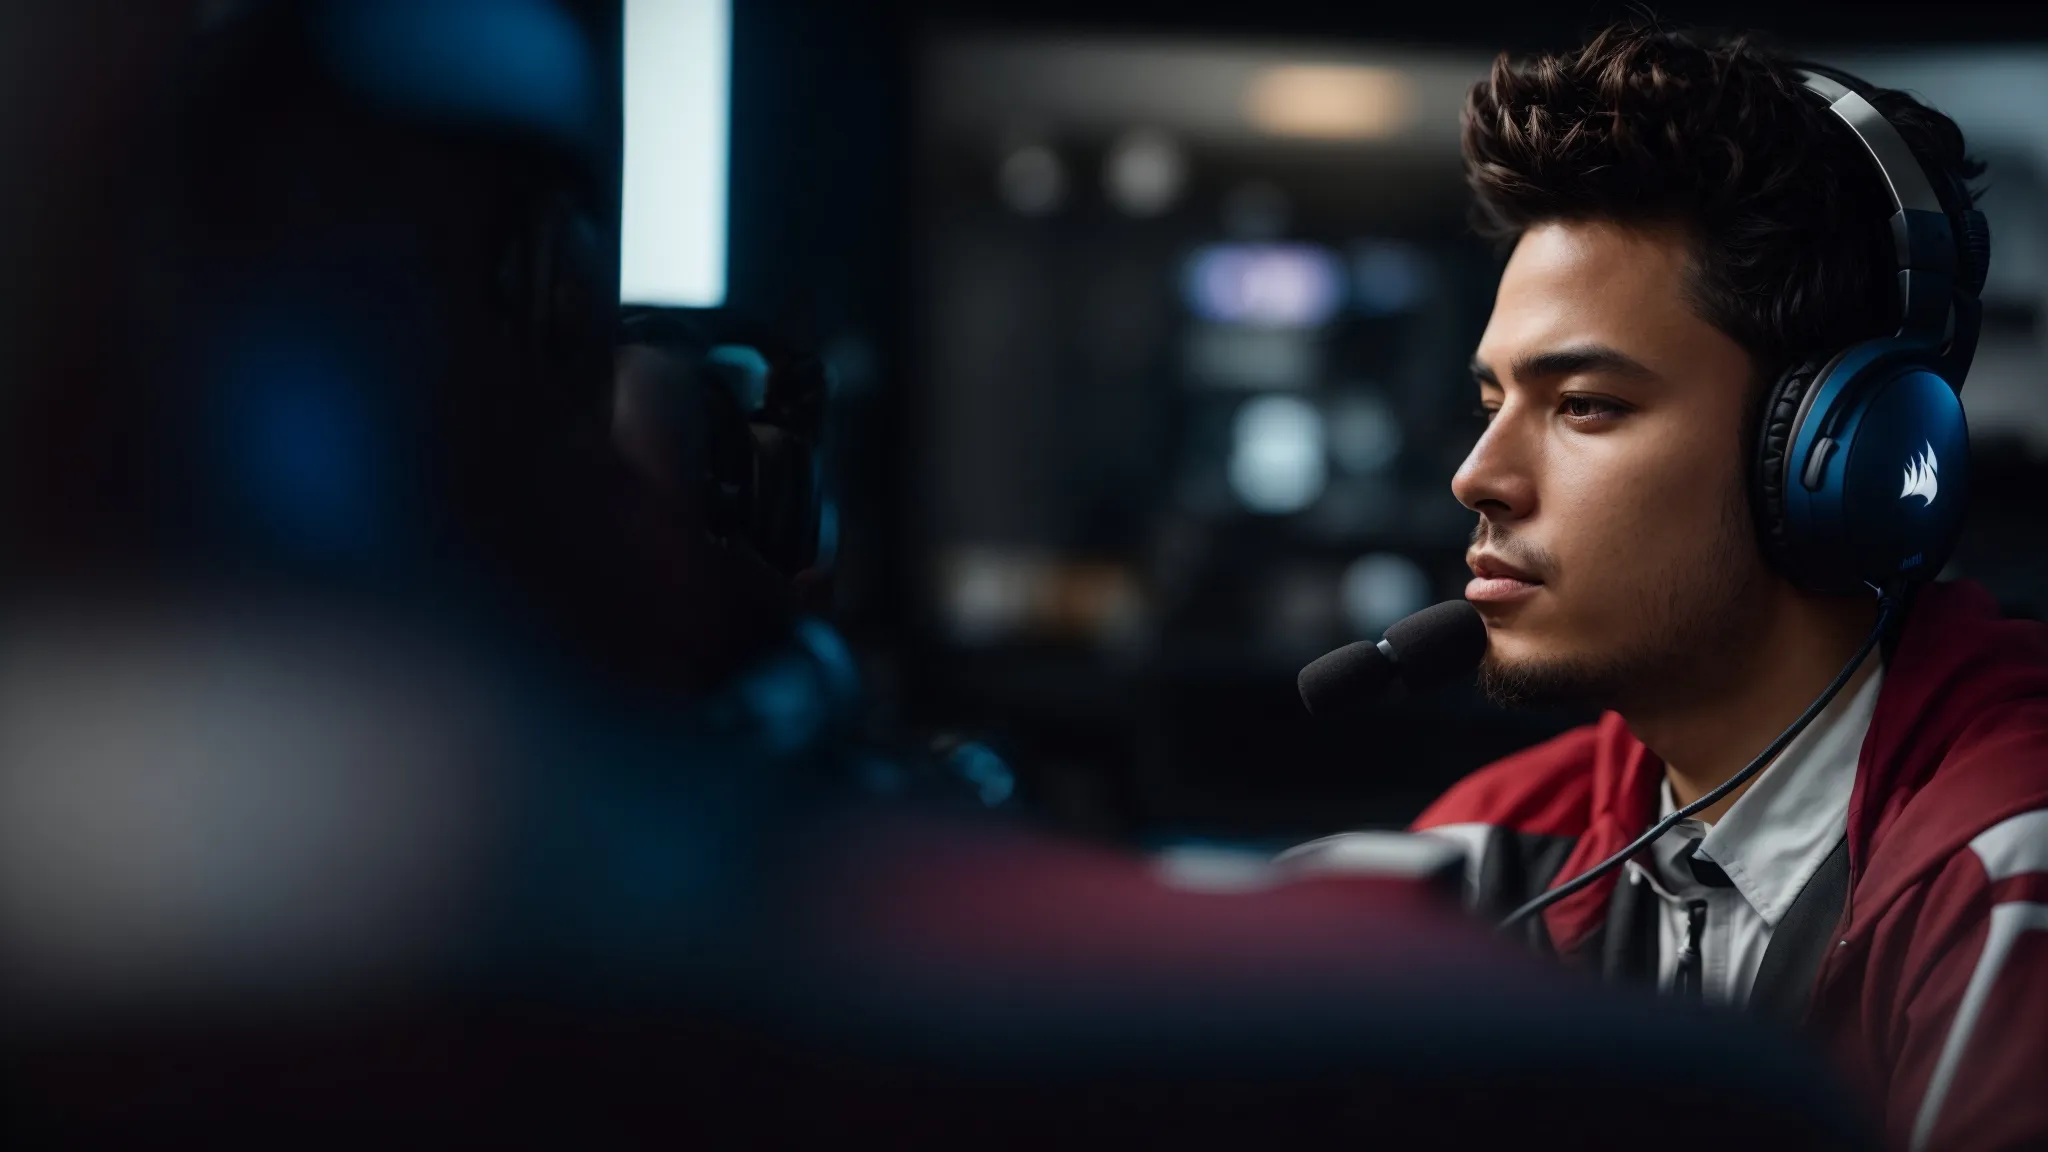 a gamer, deeply immersed in a captivating game environment, wears the corsair hs55 headset, accentuating a focused and comfortable gaming setup.